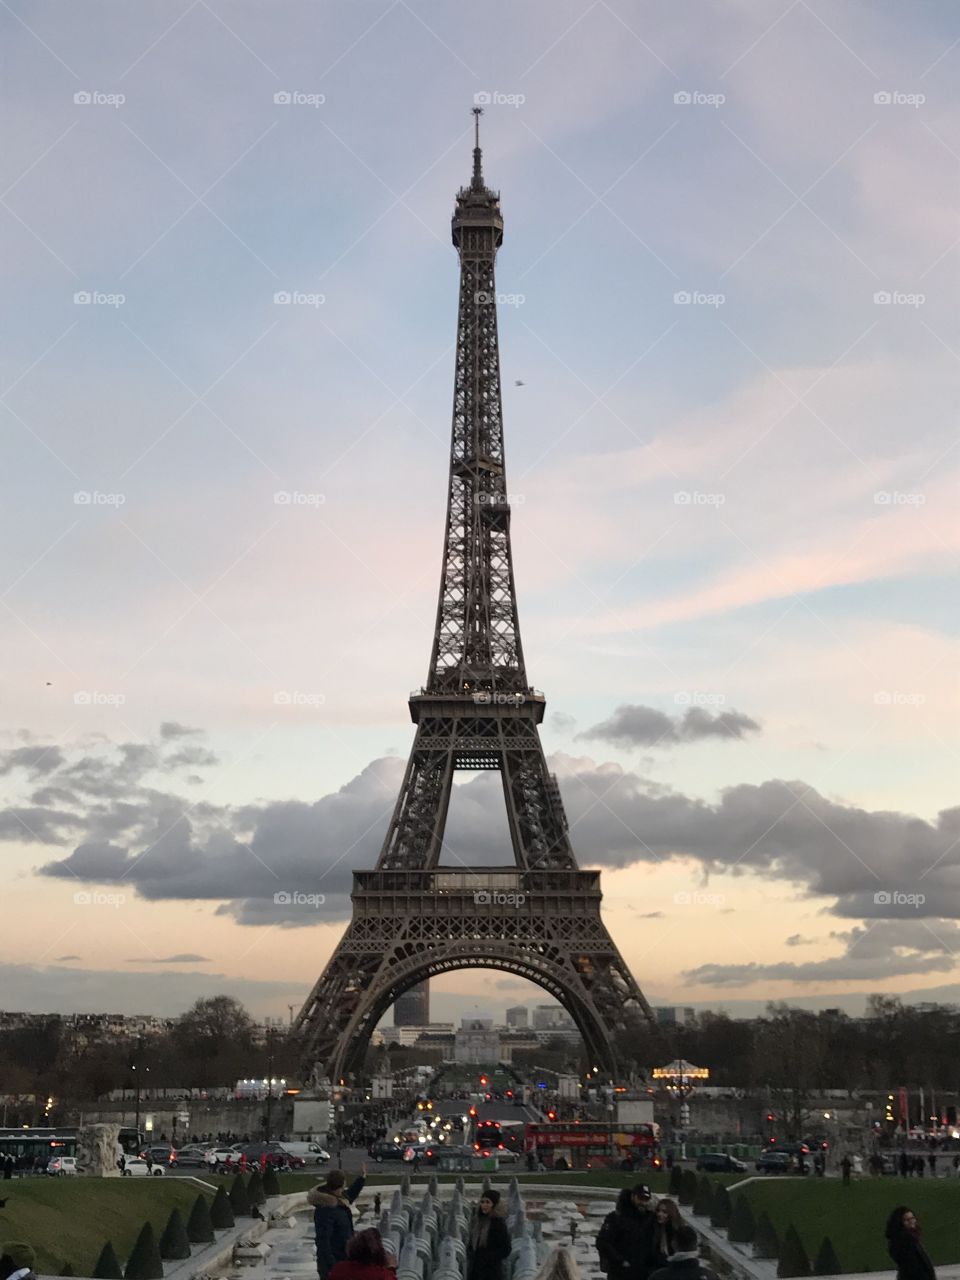 The Eiffel Tower featuring the natural beauty of the sky before sunset. 